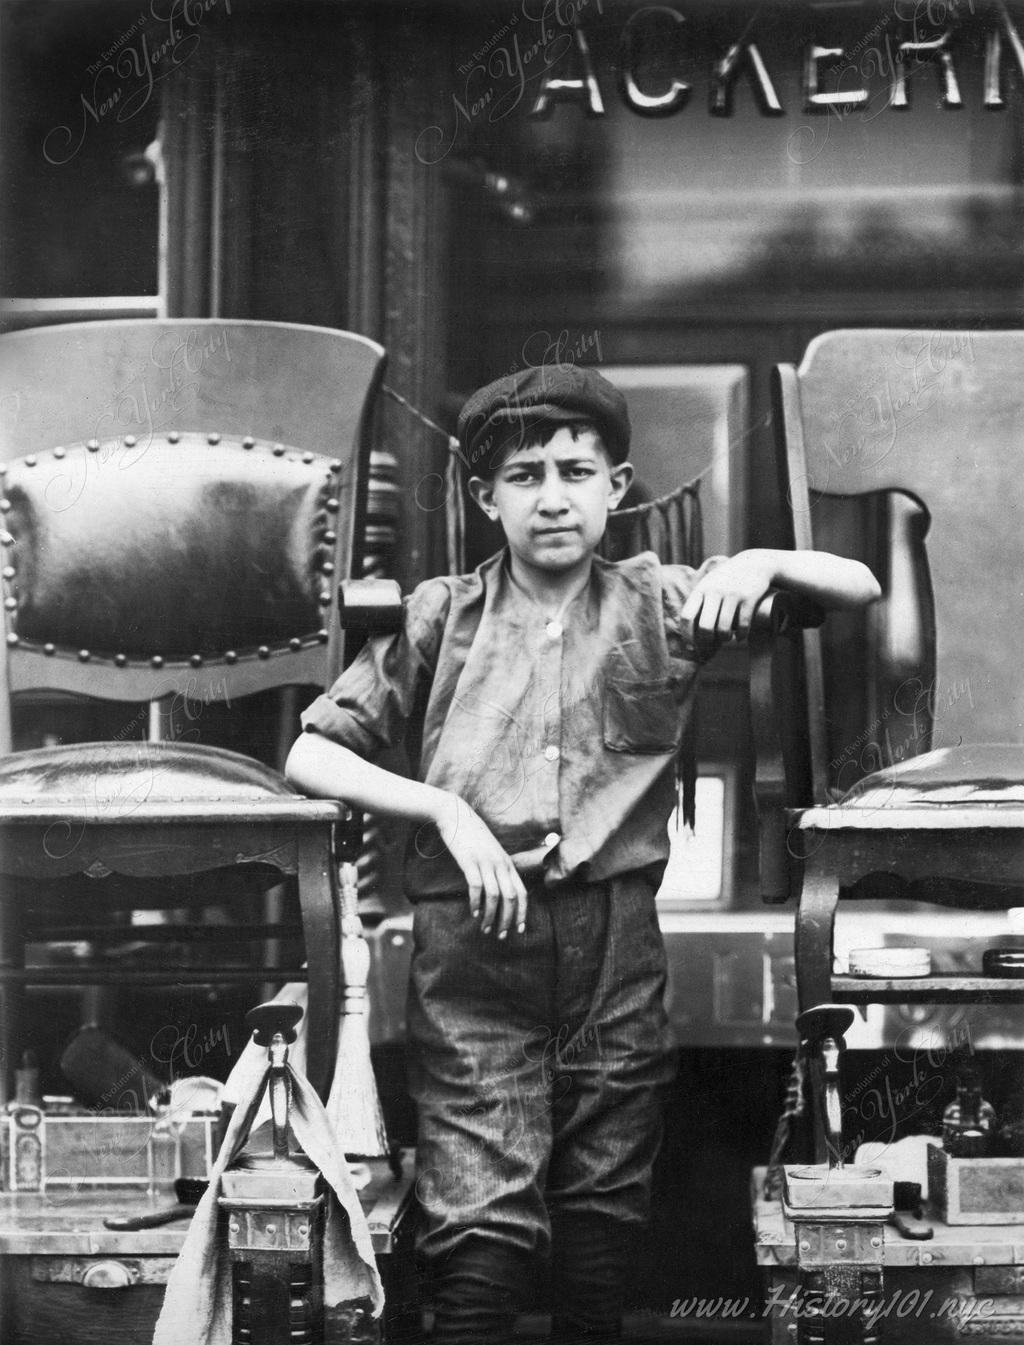 Photograph of a Frank Villanello, tending his father's shoe shine stand located at 21 Greenwich Avenue